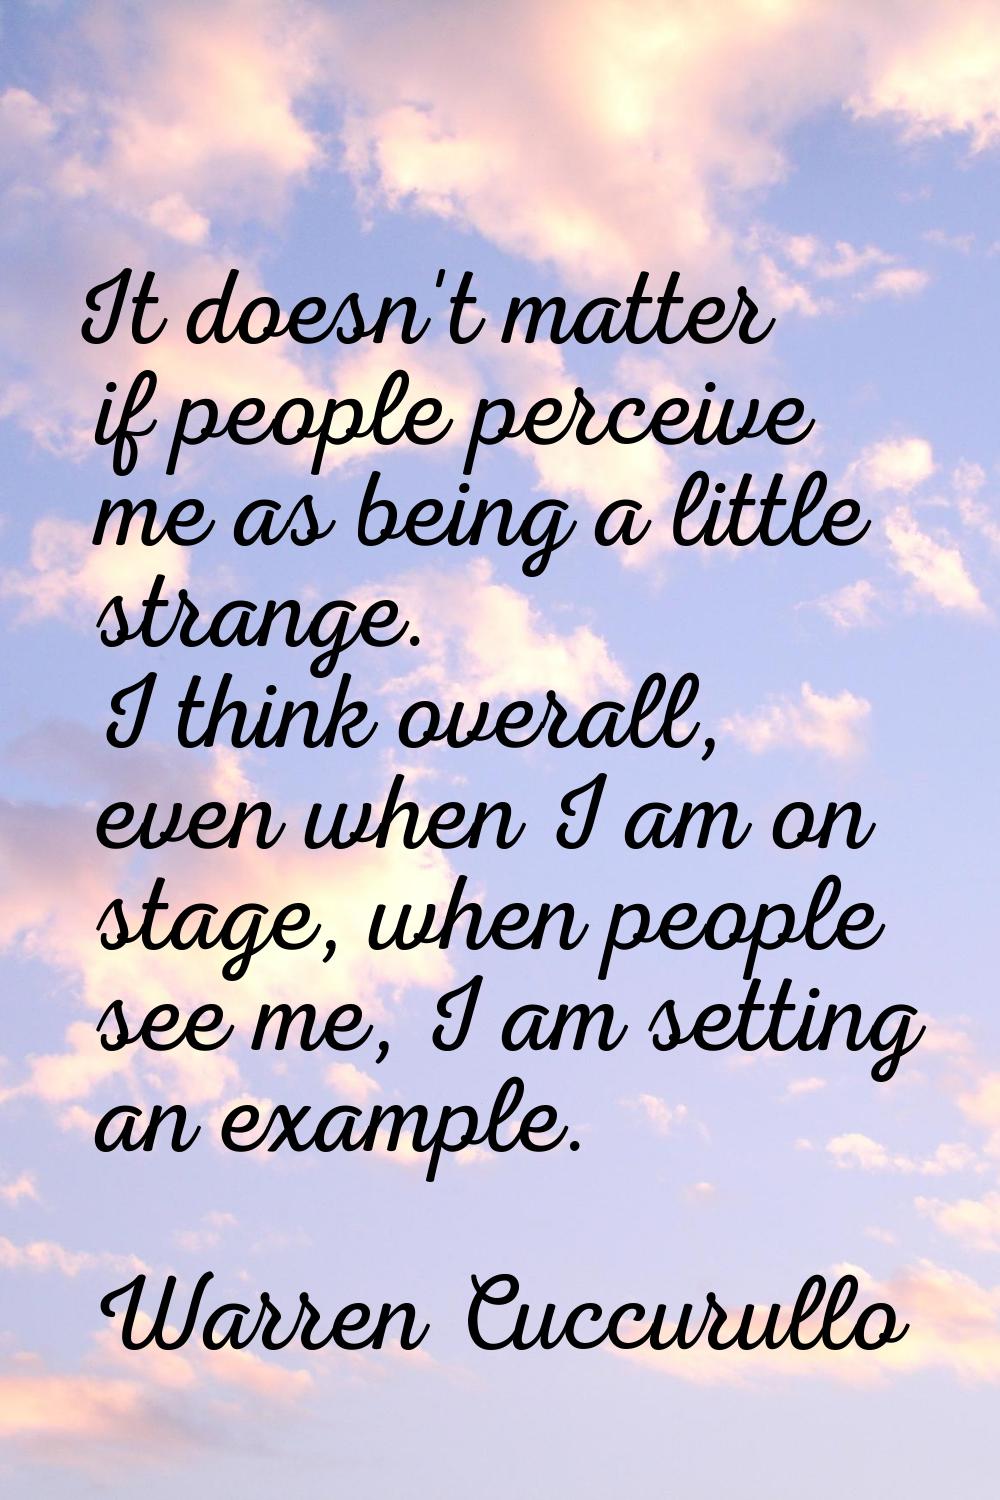 It doesn't matter if people perceive me as being a little strange. I think overall, even when I am 